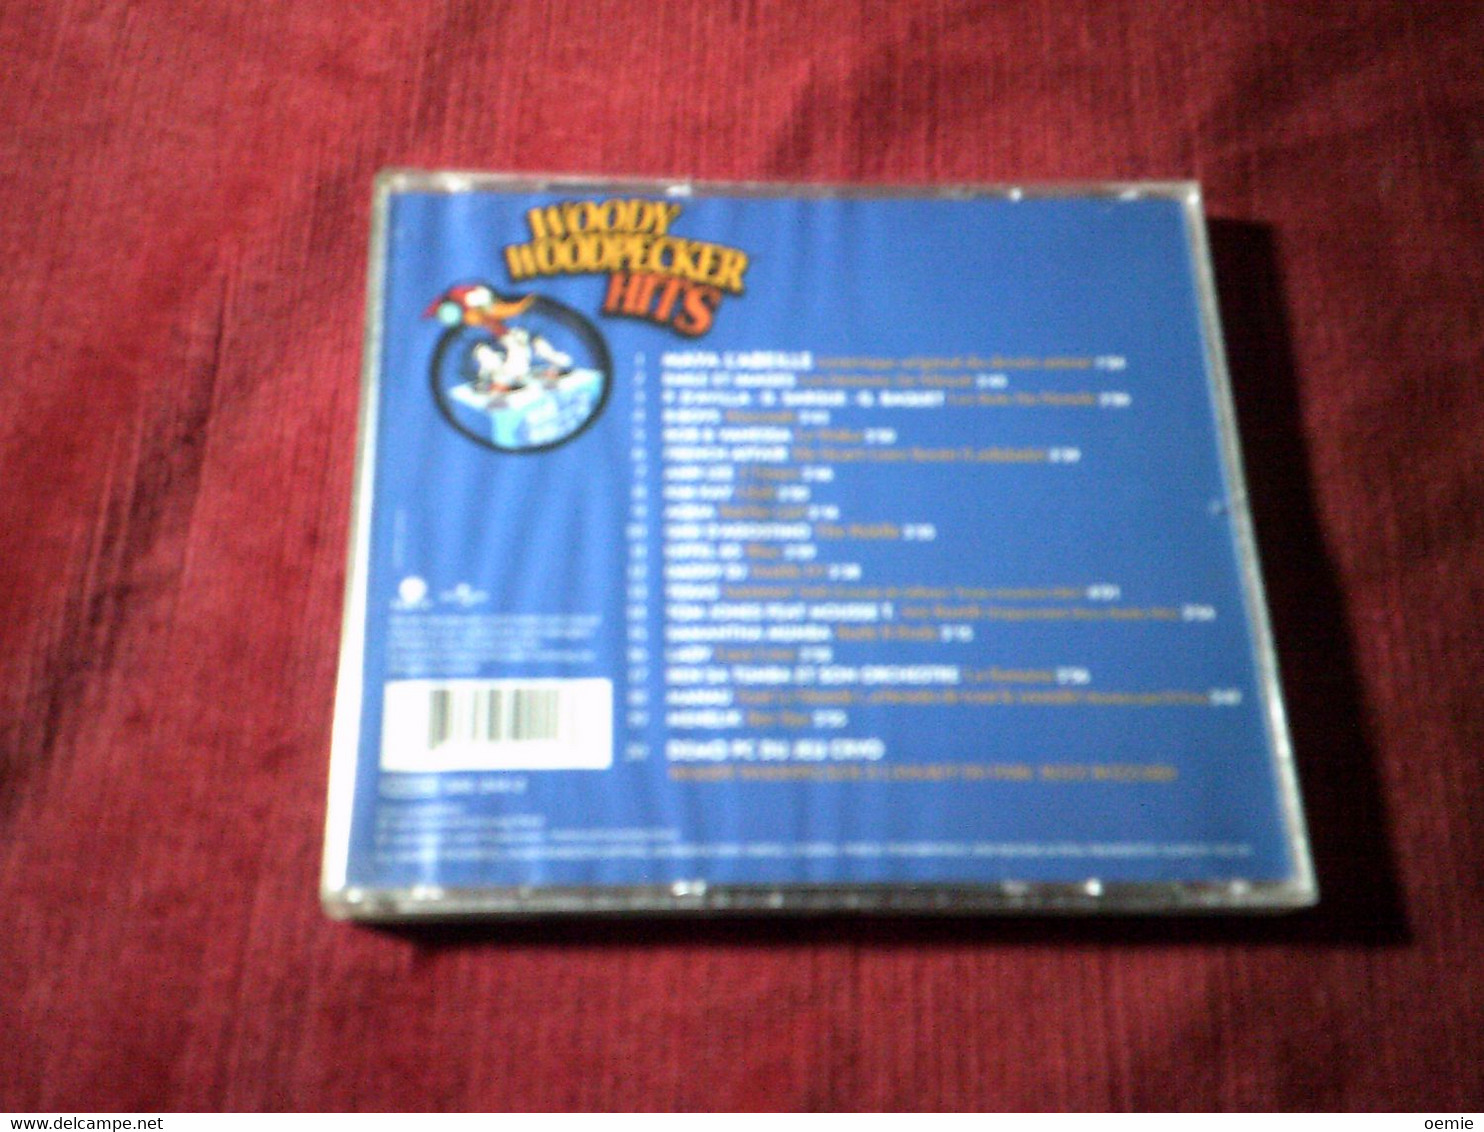 WOODY WOODPECKER  HITS °  Cd  20  TITRES - Compilations